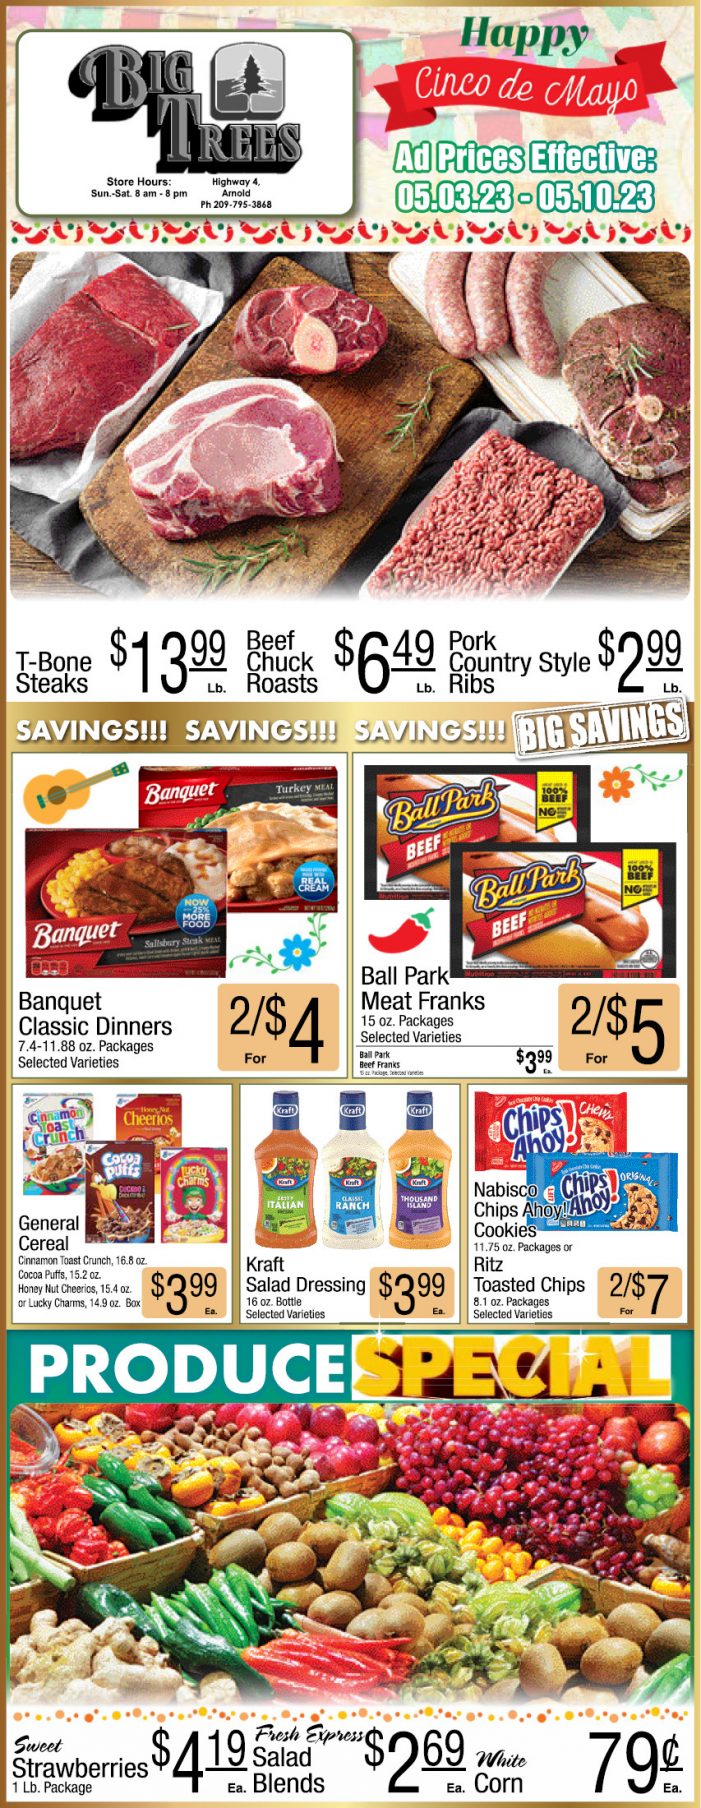 Big Trees Market Weekly Ad, Grocery, Produce, Meat & Deli Specials May 3rd – 10th!  Shop Local & Save!